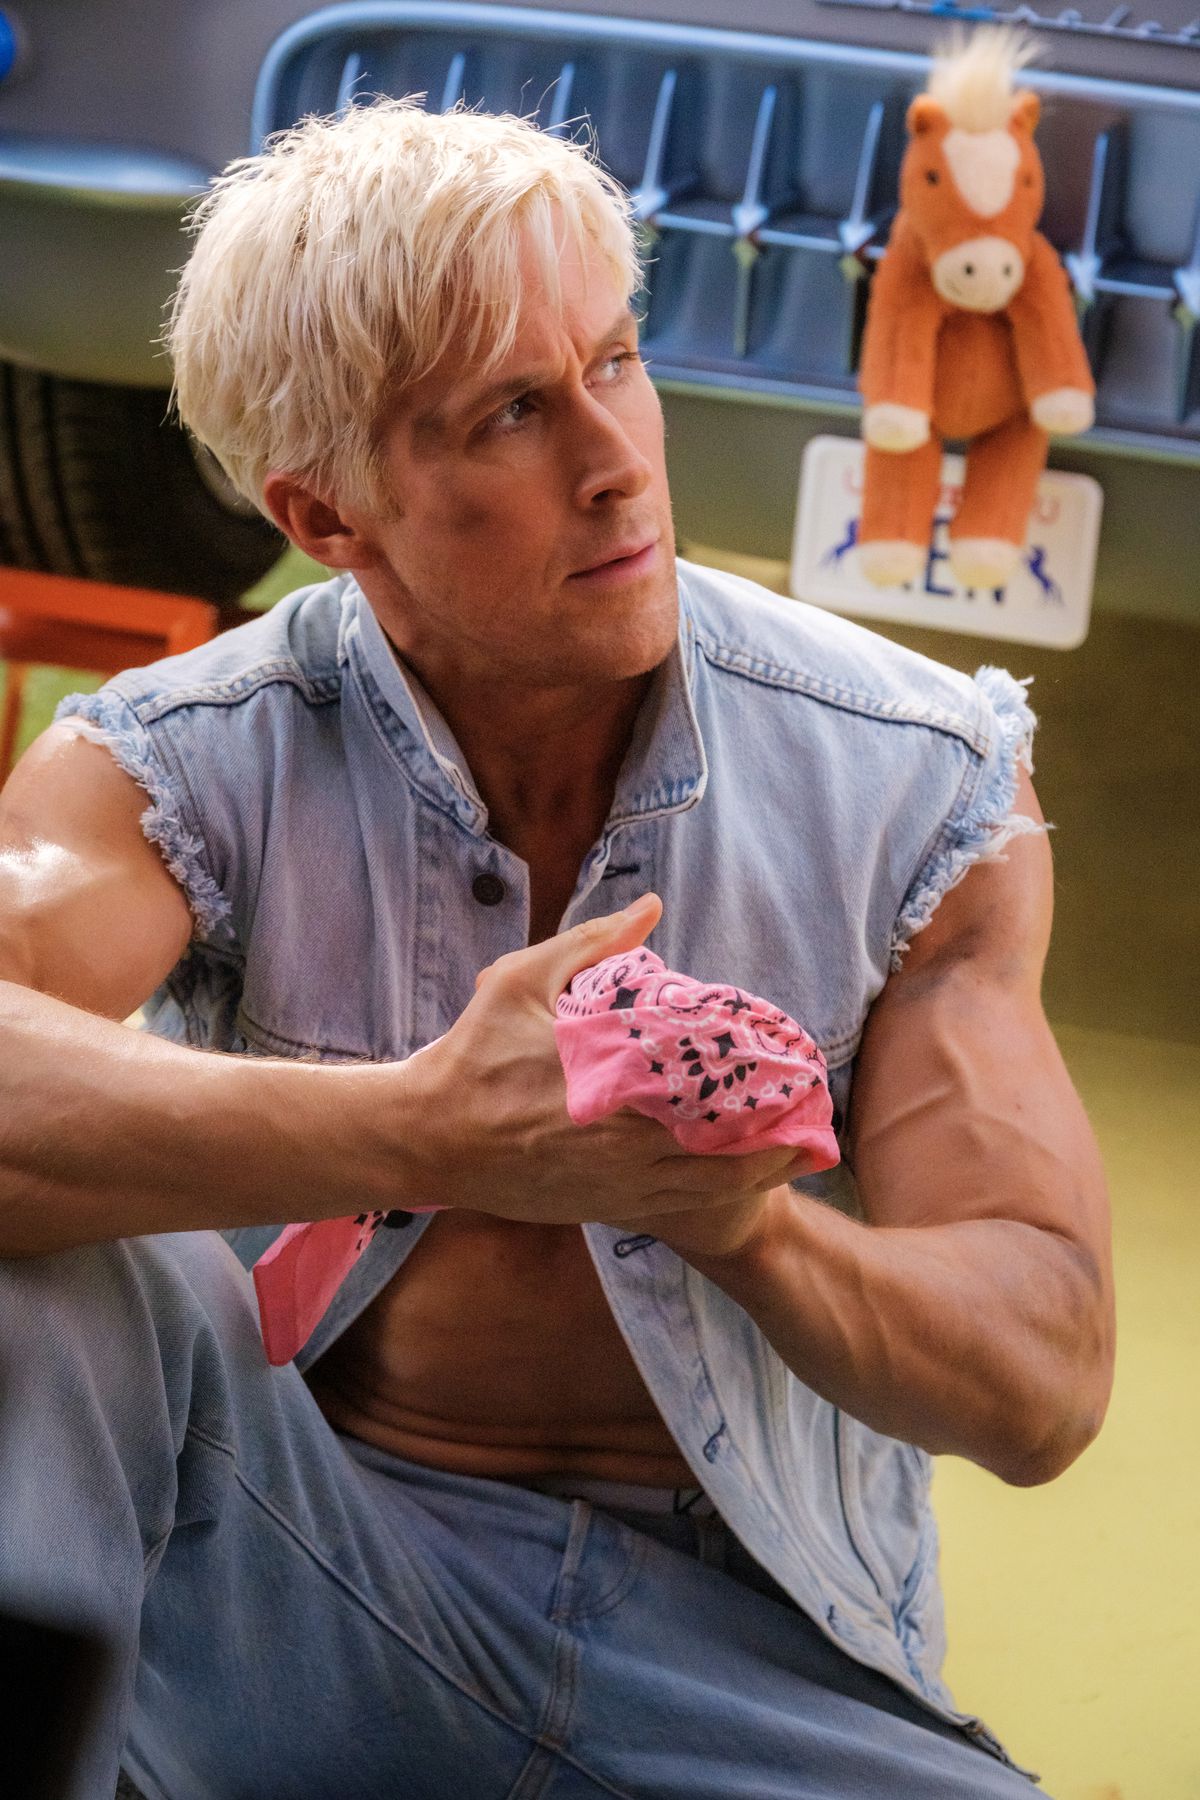 Ryan Gosling as Ken in a denim vest and jeans, a little pink bandana in his hands. He sits on the floor. Behind him there is a truck, with a stuffed horse attached to the front. 